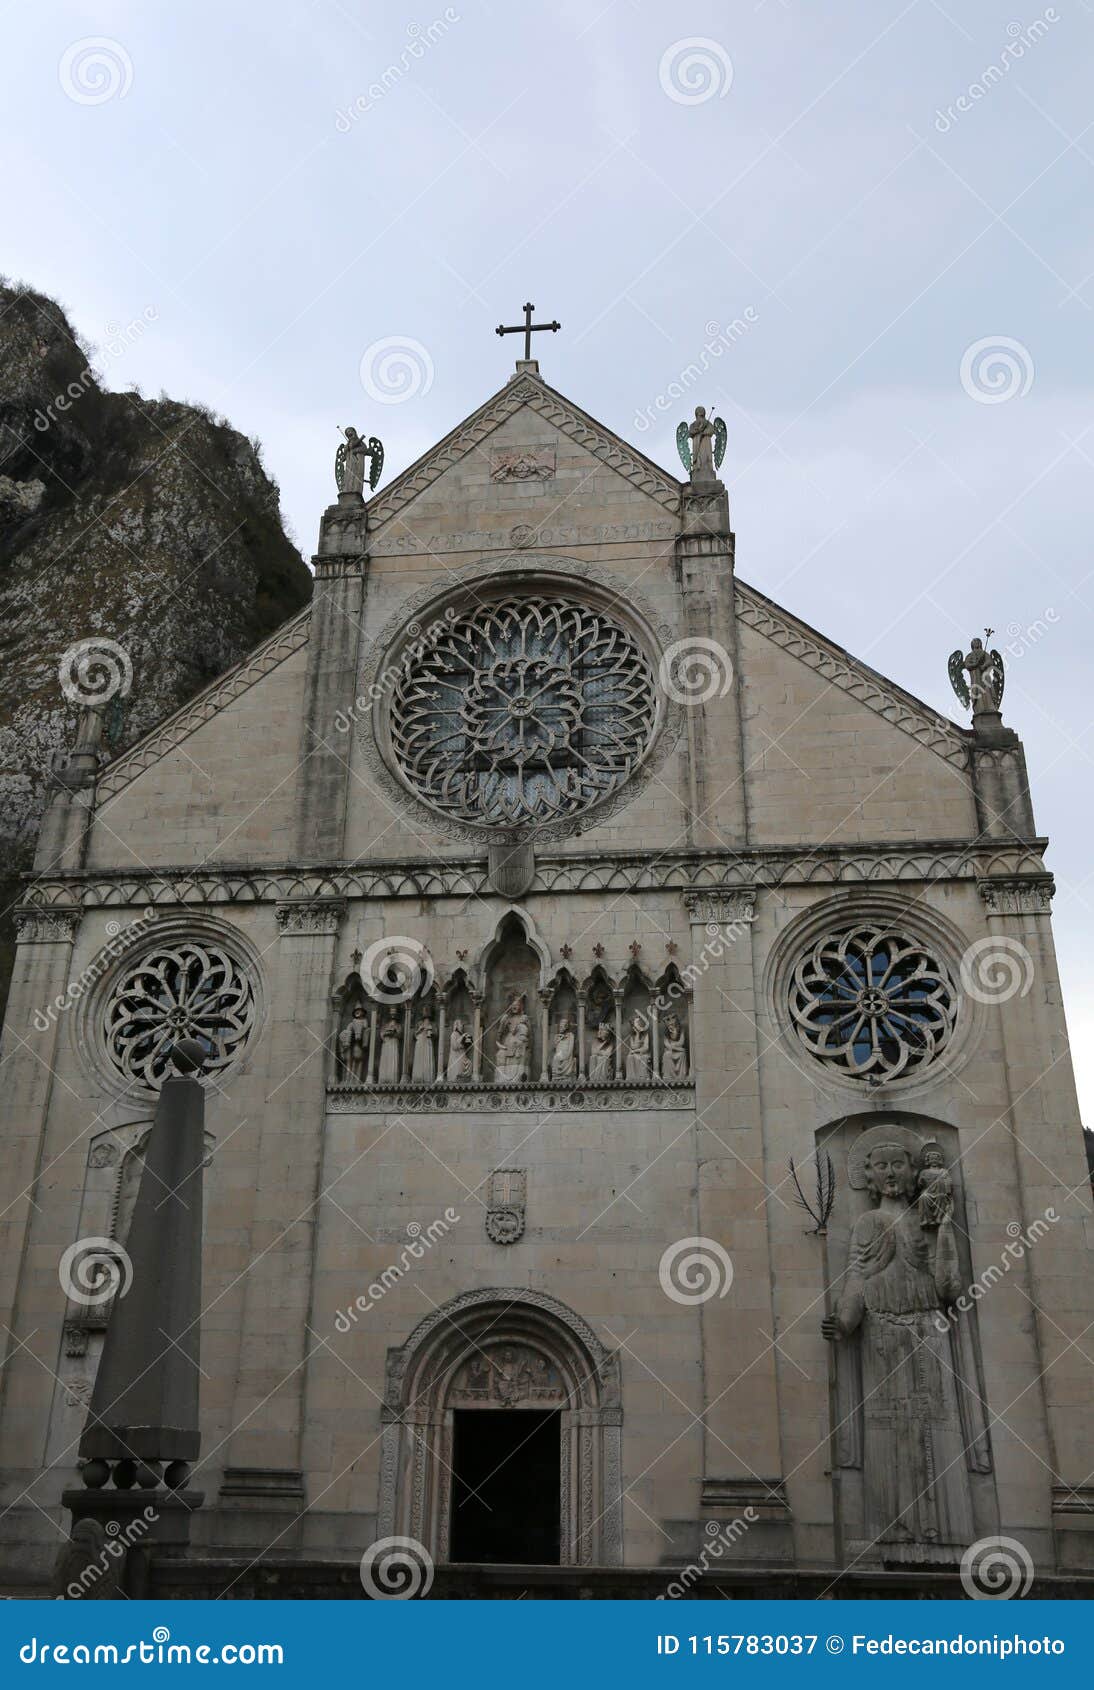 ancient cathedral in gemona del friuli in northern italy. the ch